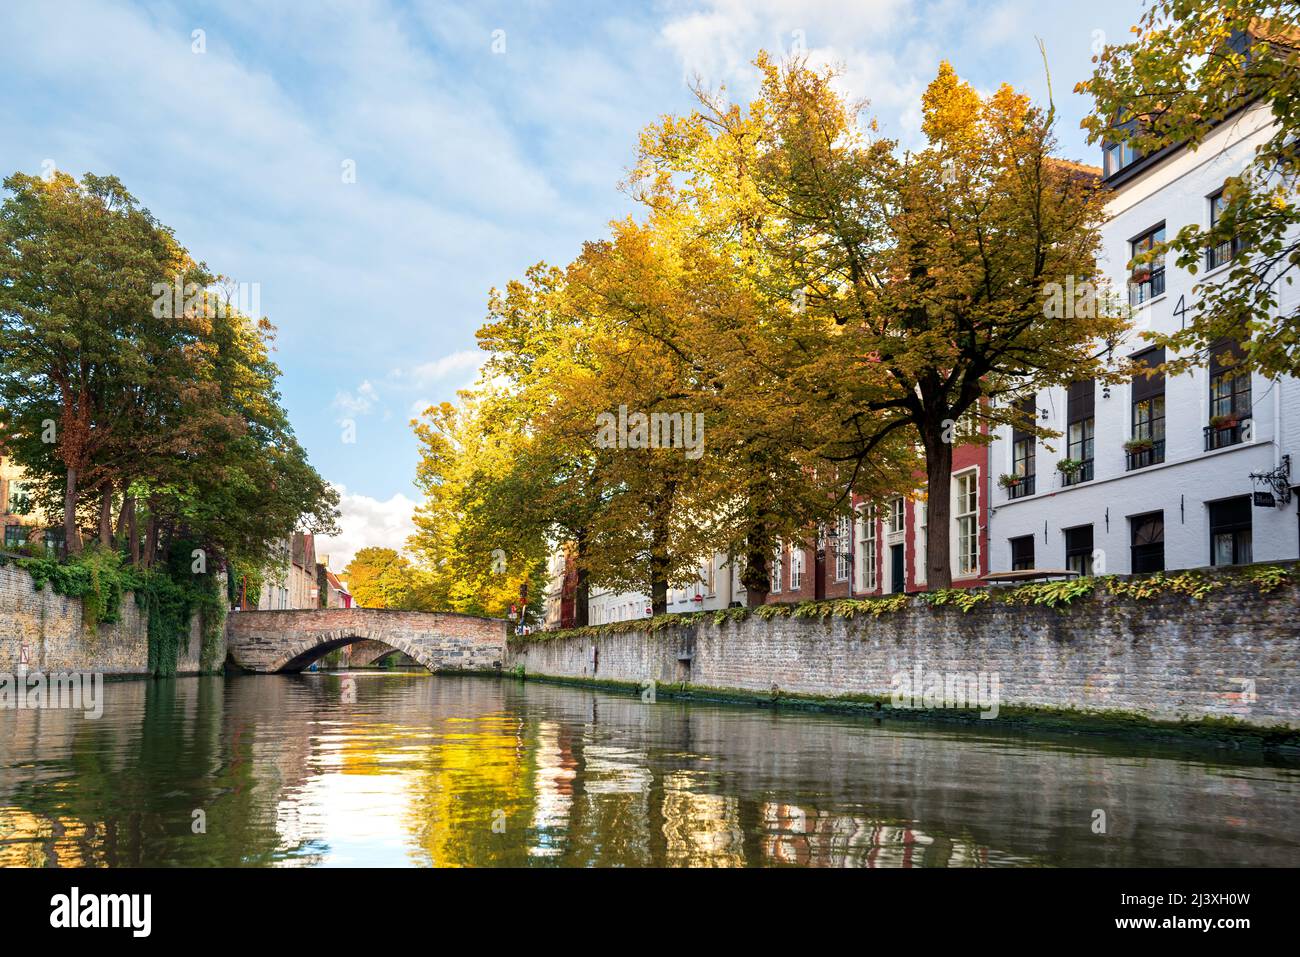 Autumn view of the historical canal in Bruges, Belgium with a beautiful reflection of autumn yellow trees in the water. Stock Photo